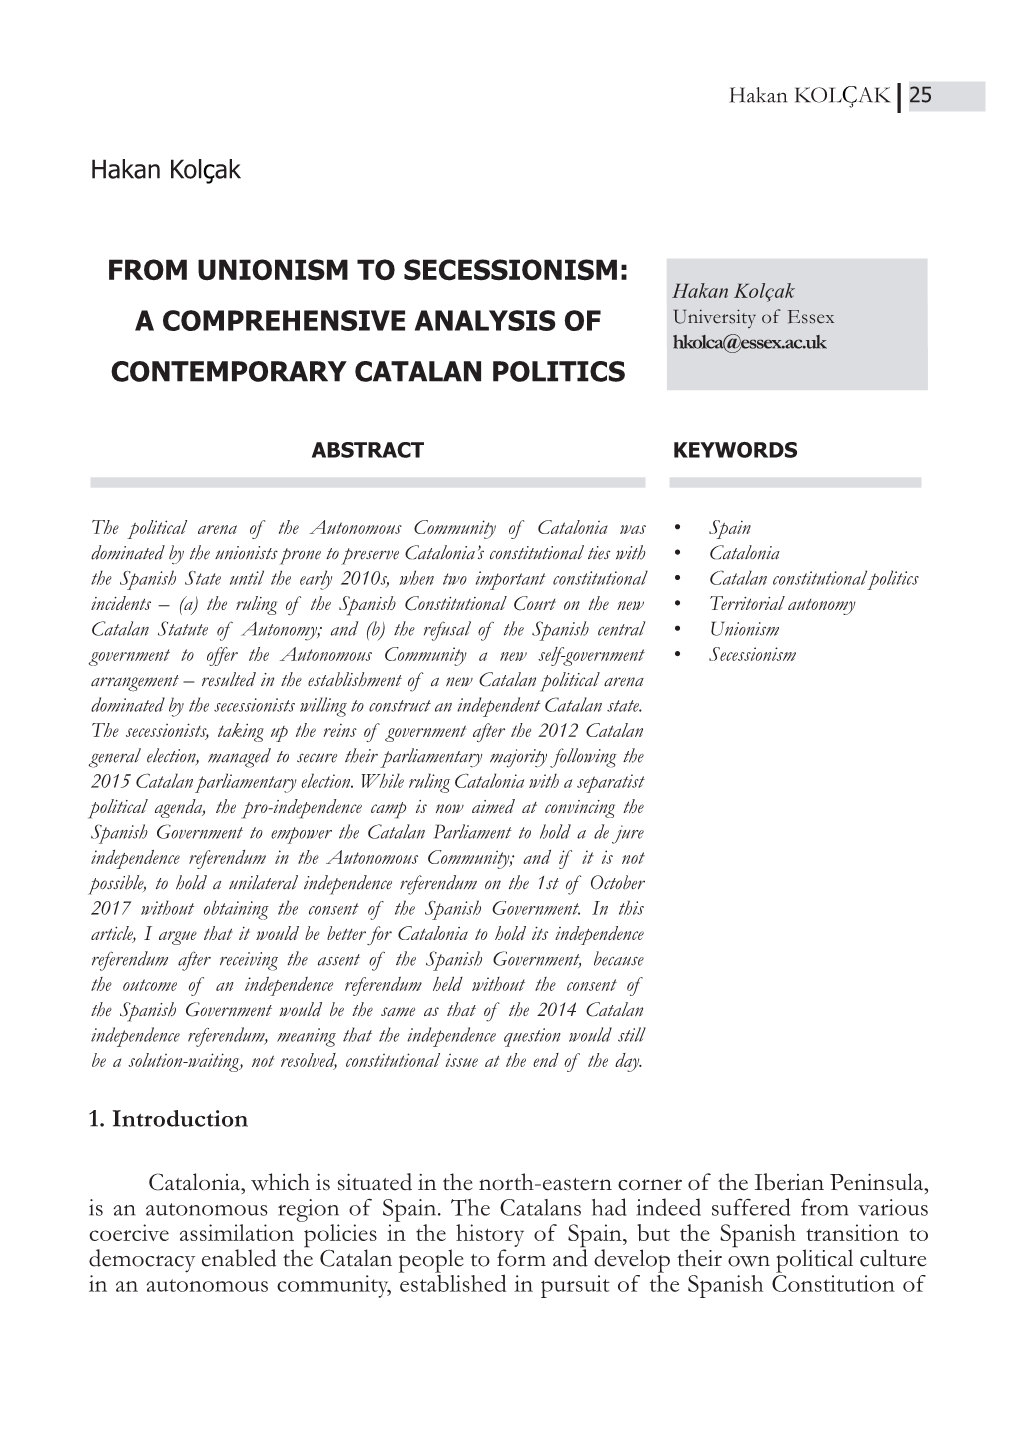 From Unionism to Secessionism: a Comprehensive Analysis of Contemporary Catalan Politics